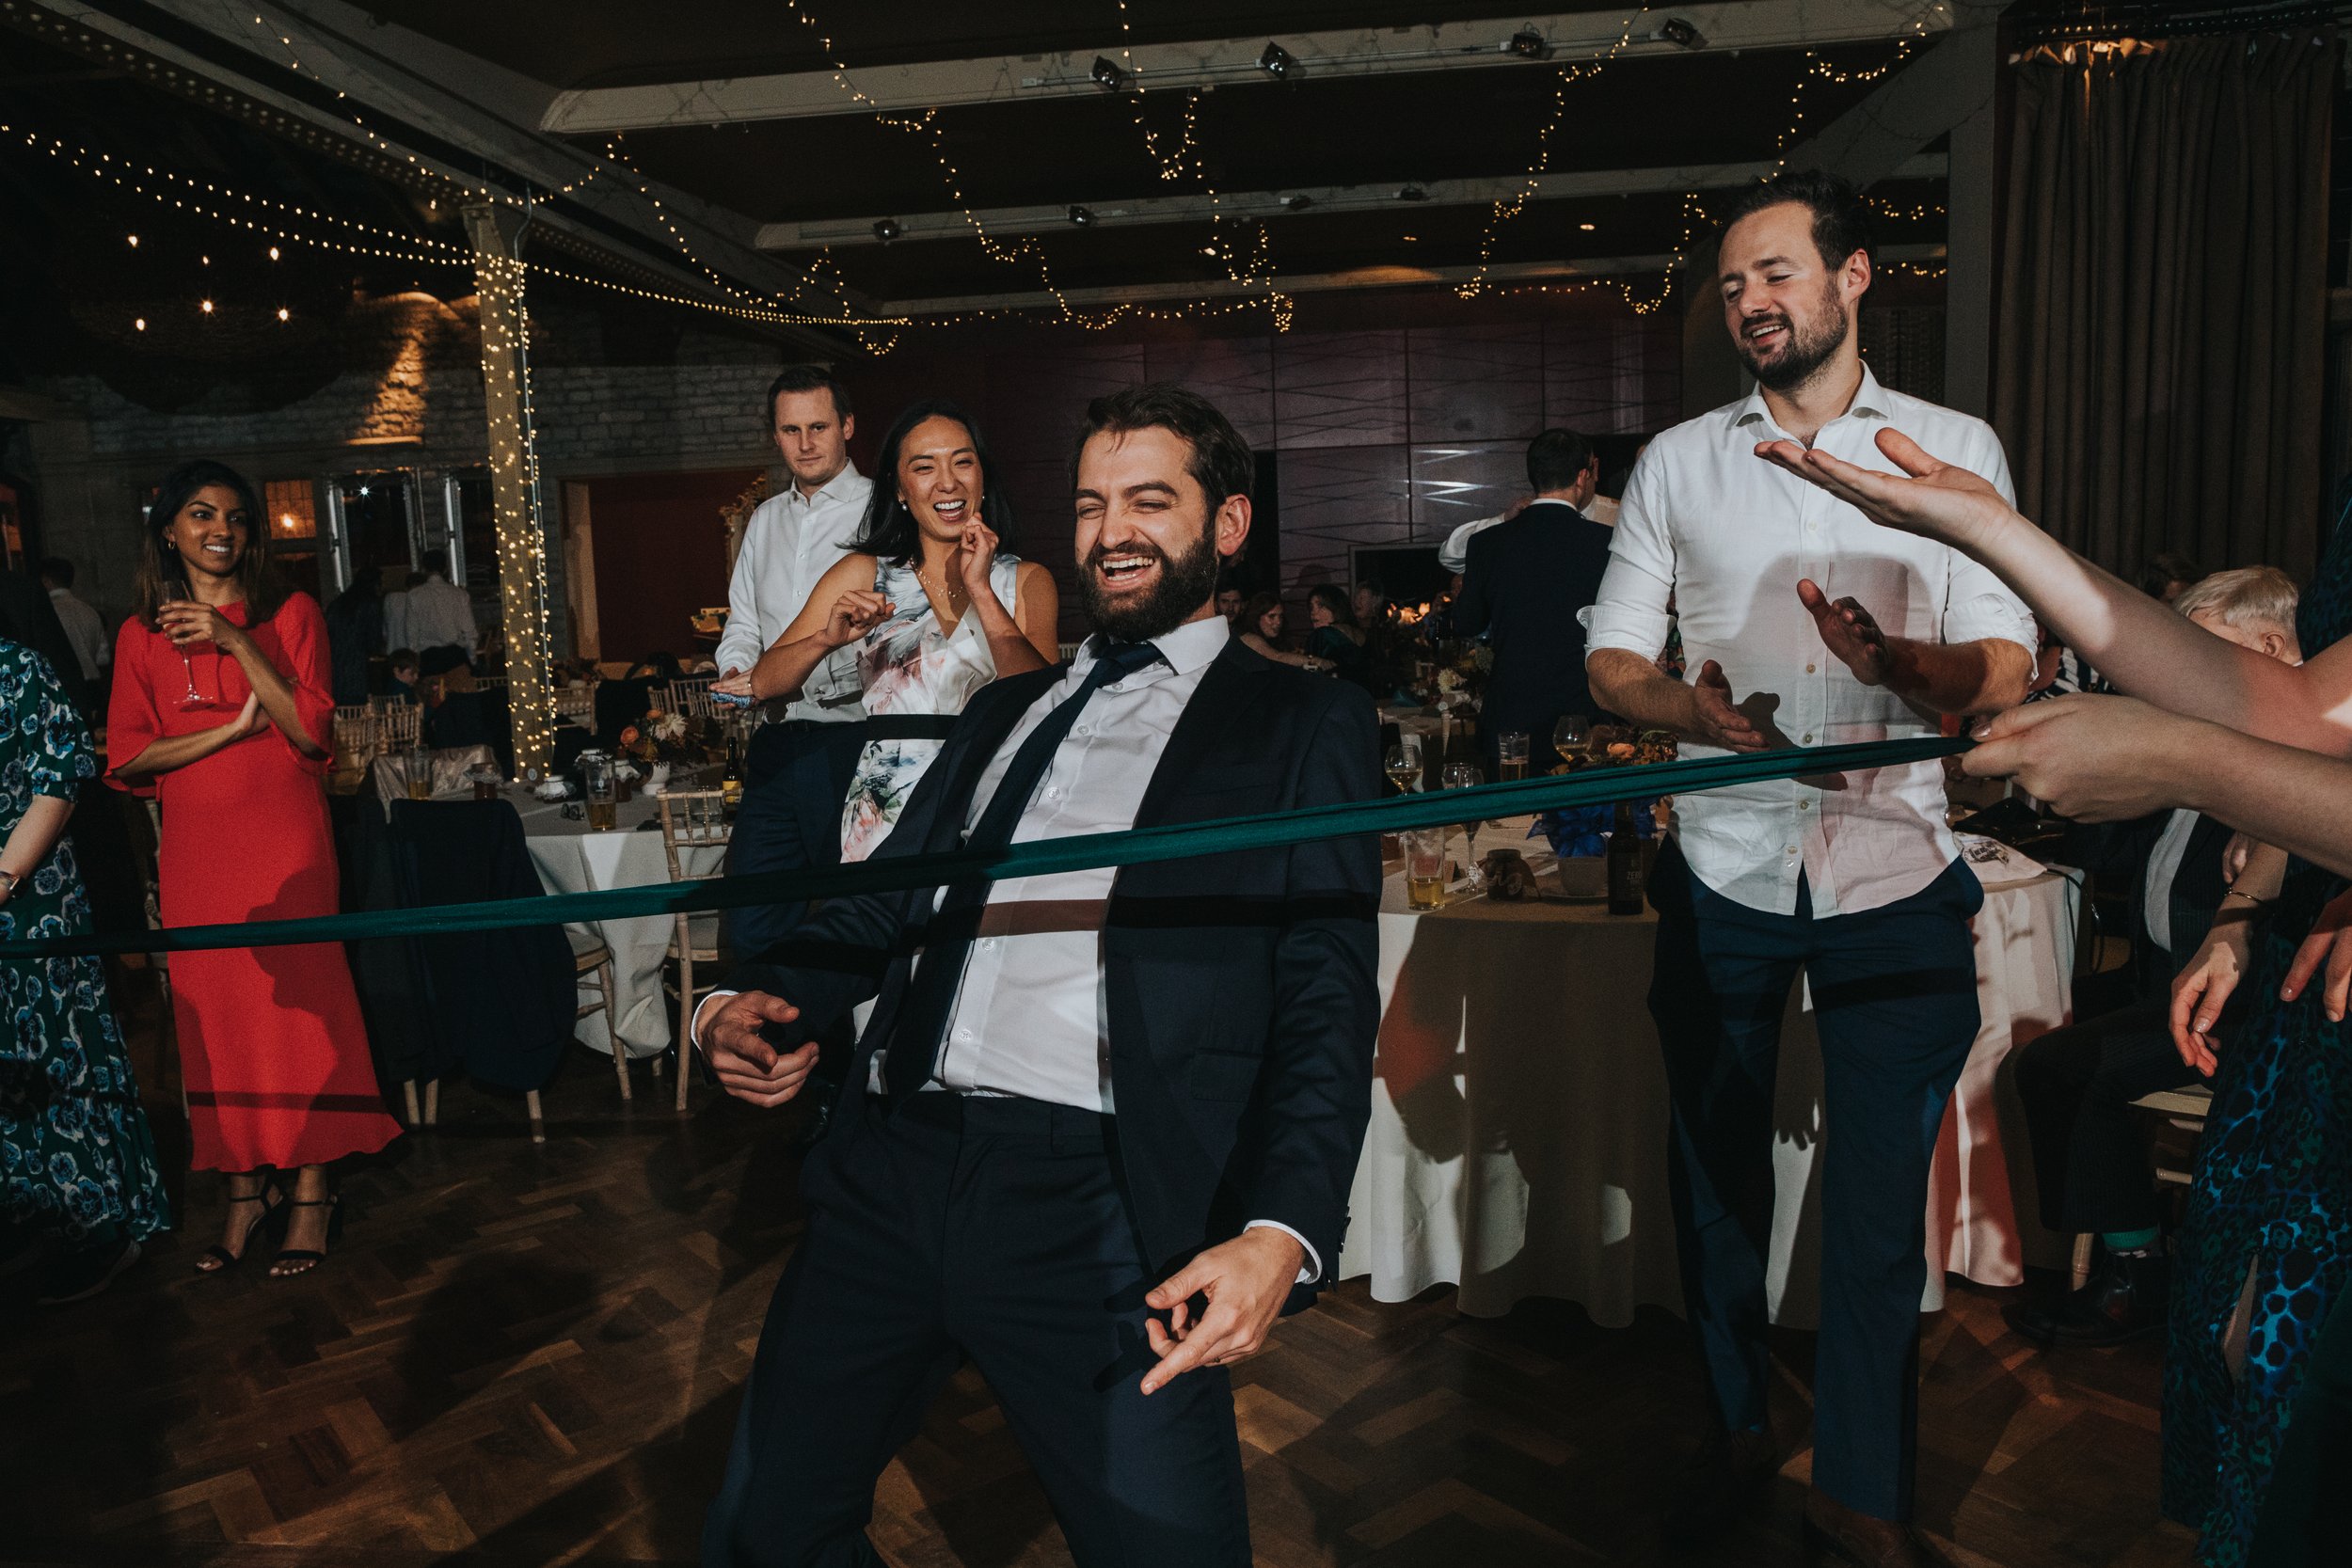 Adult laughs as he does the dance floor limbo. 